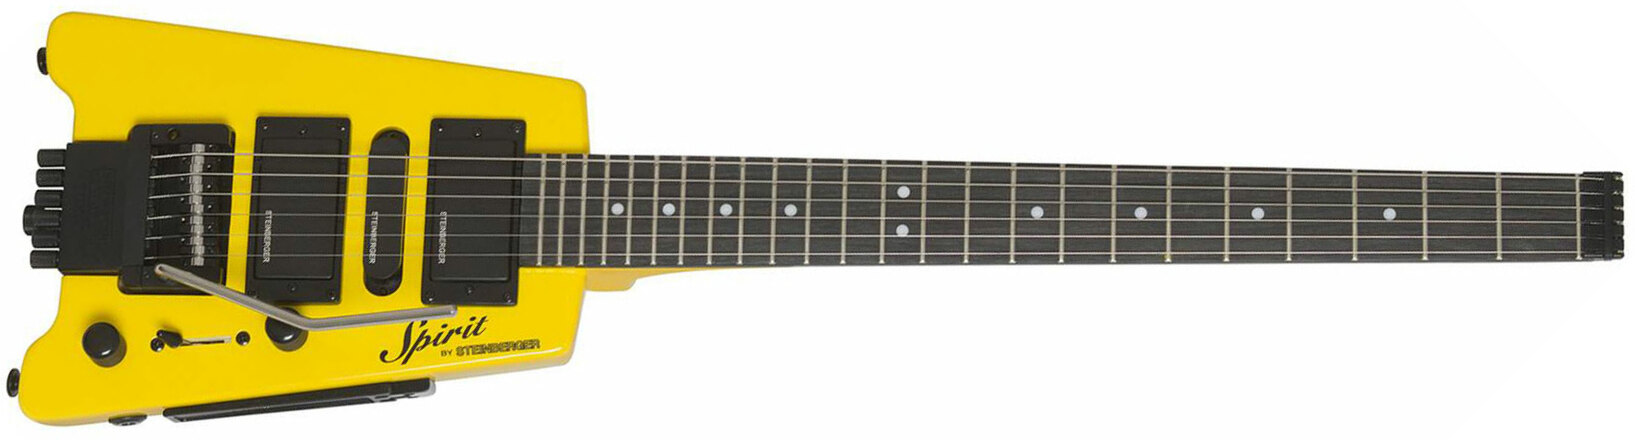 Steinberger Gt-pro Deluxe Outfit Hsh Trem Rw +housse - Hot Rod Yellow - Elektrische Reisegitarre - Main picture